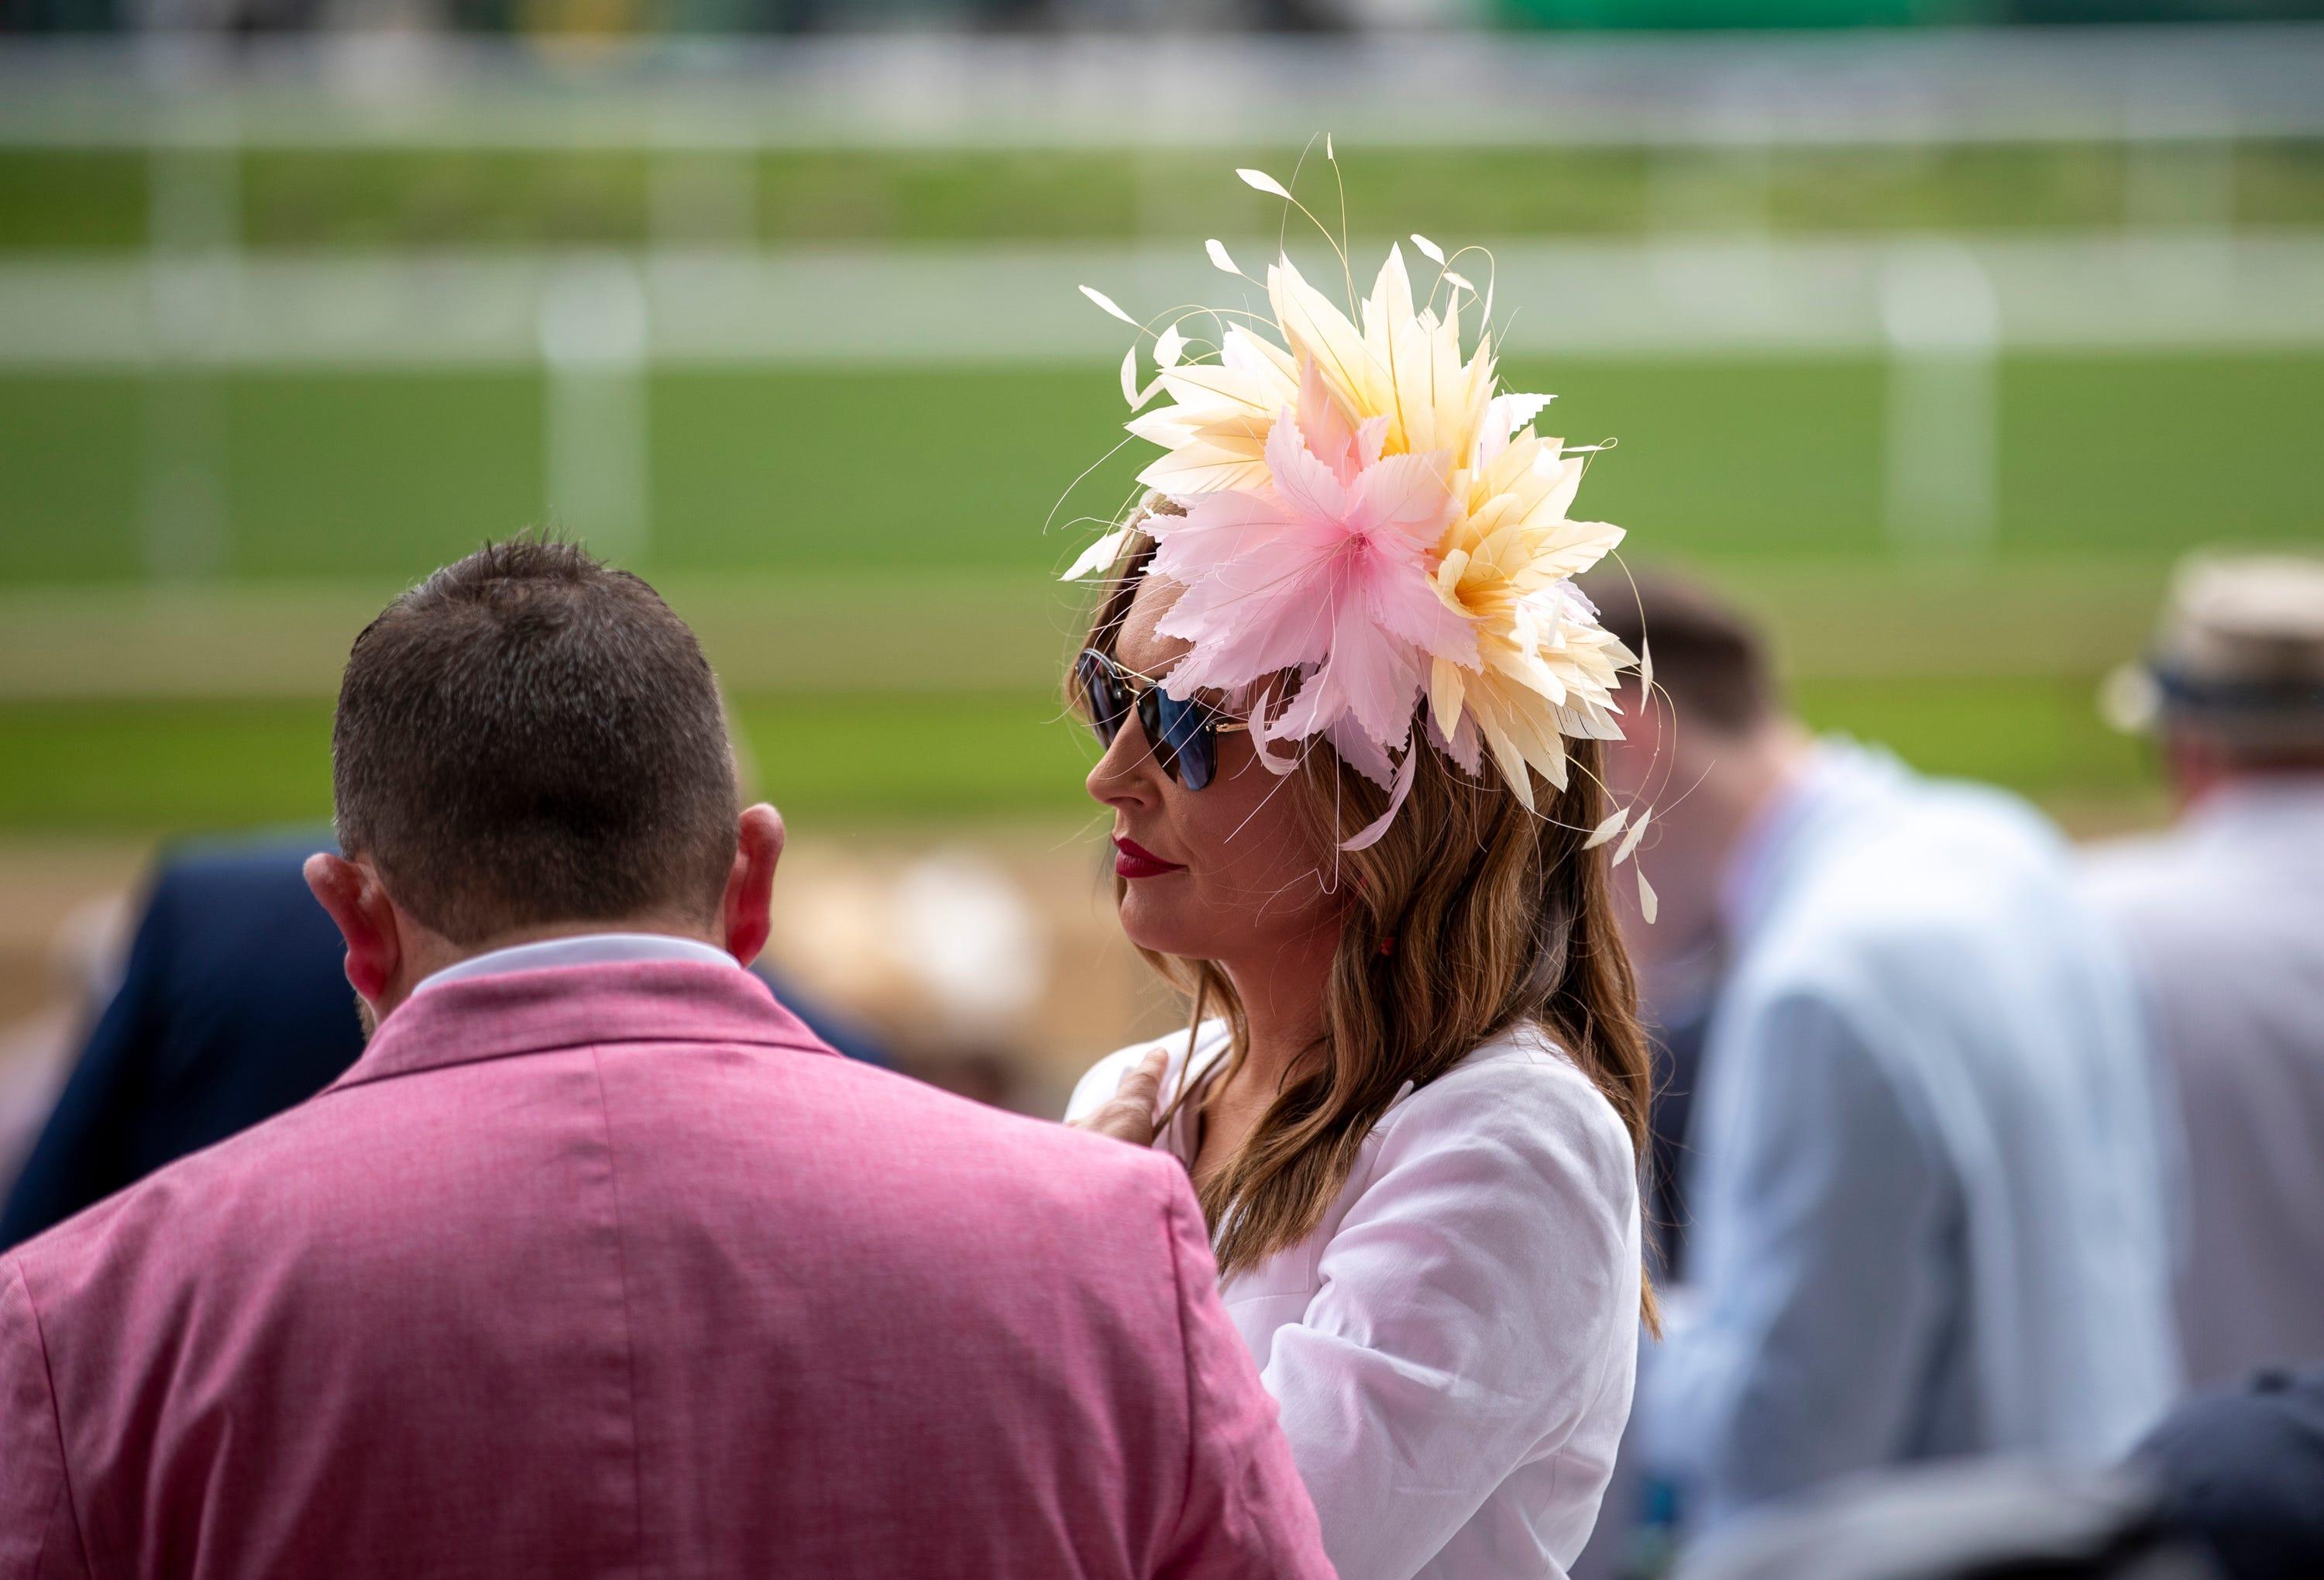 Hats, large and small, stand out at Churchill Downs on May 7, 2022 in Louisville, Ky.